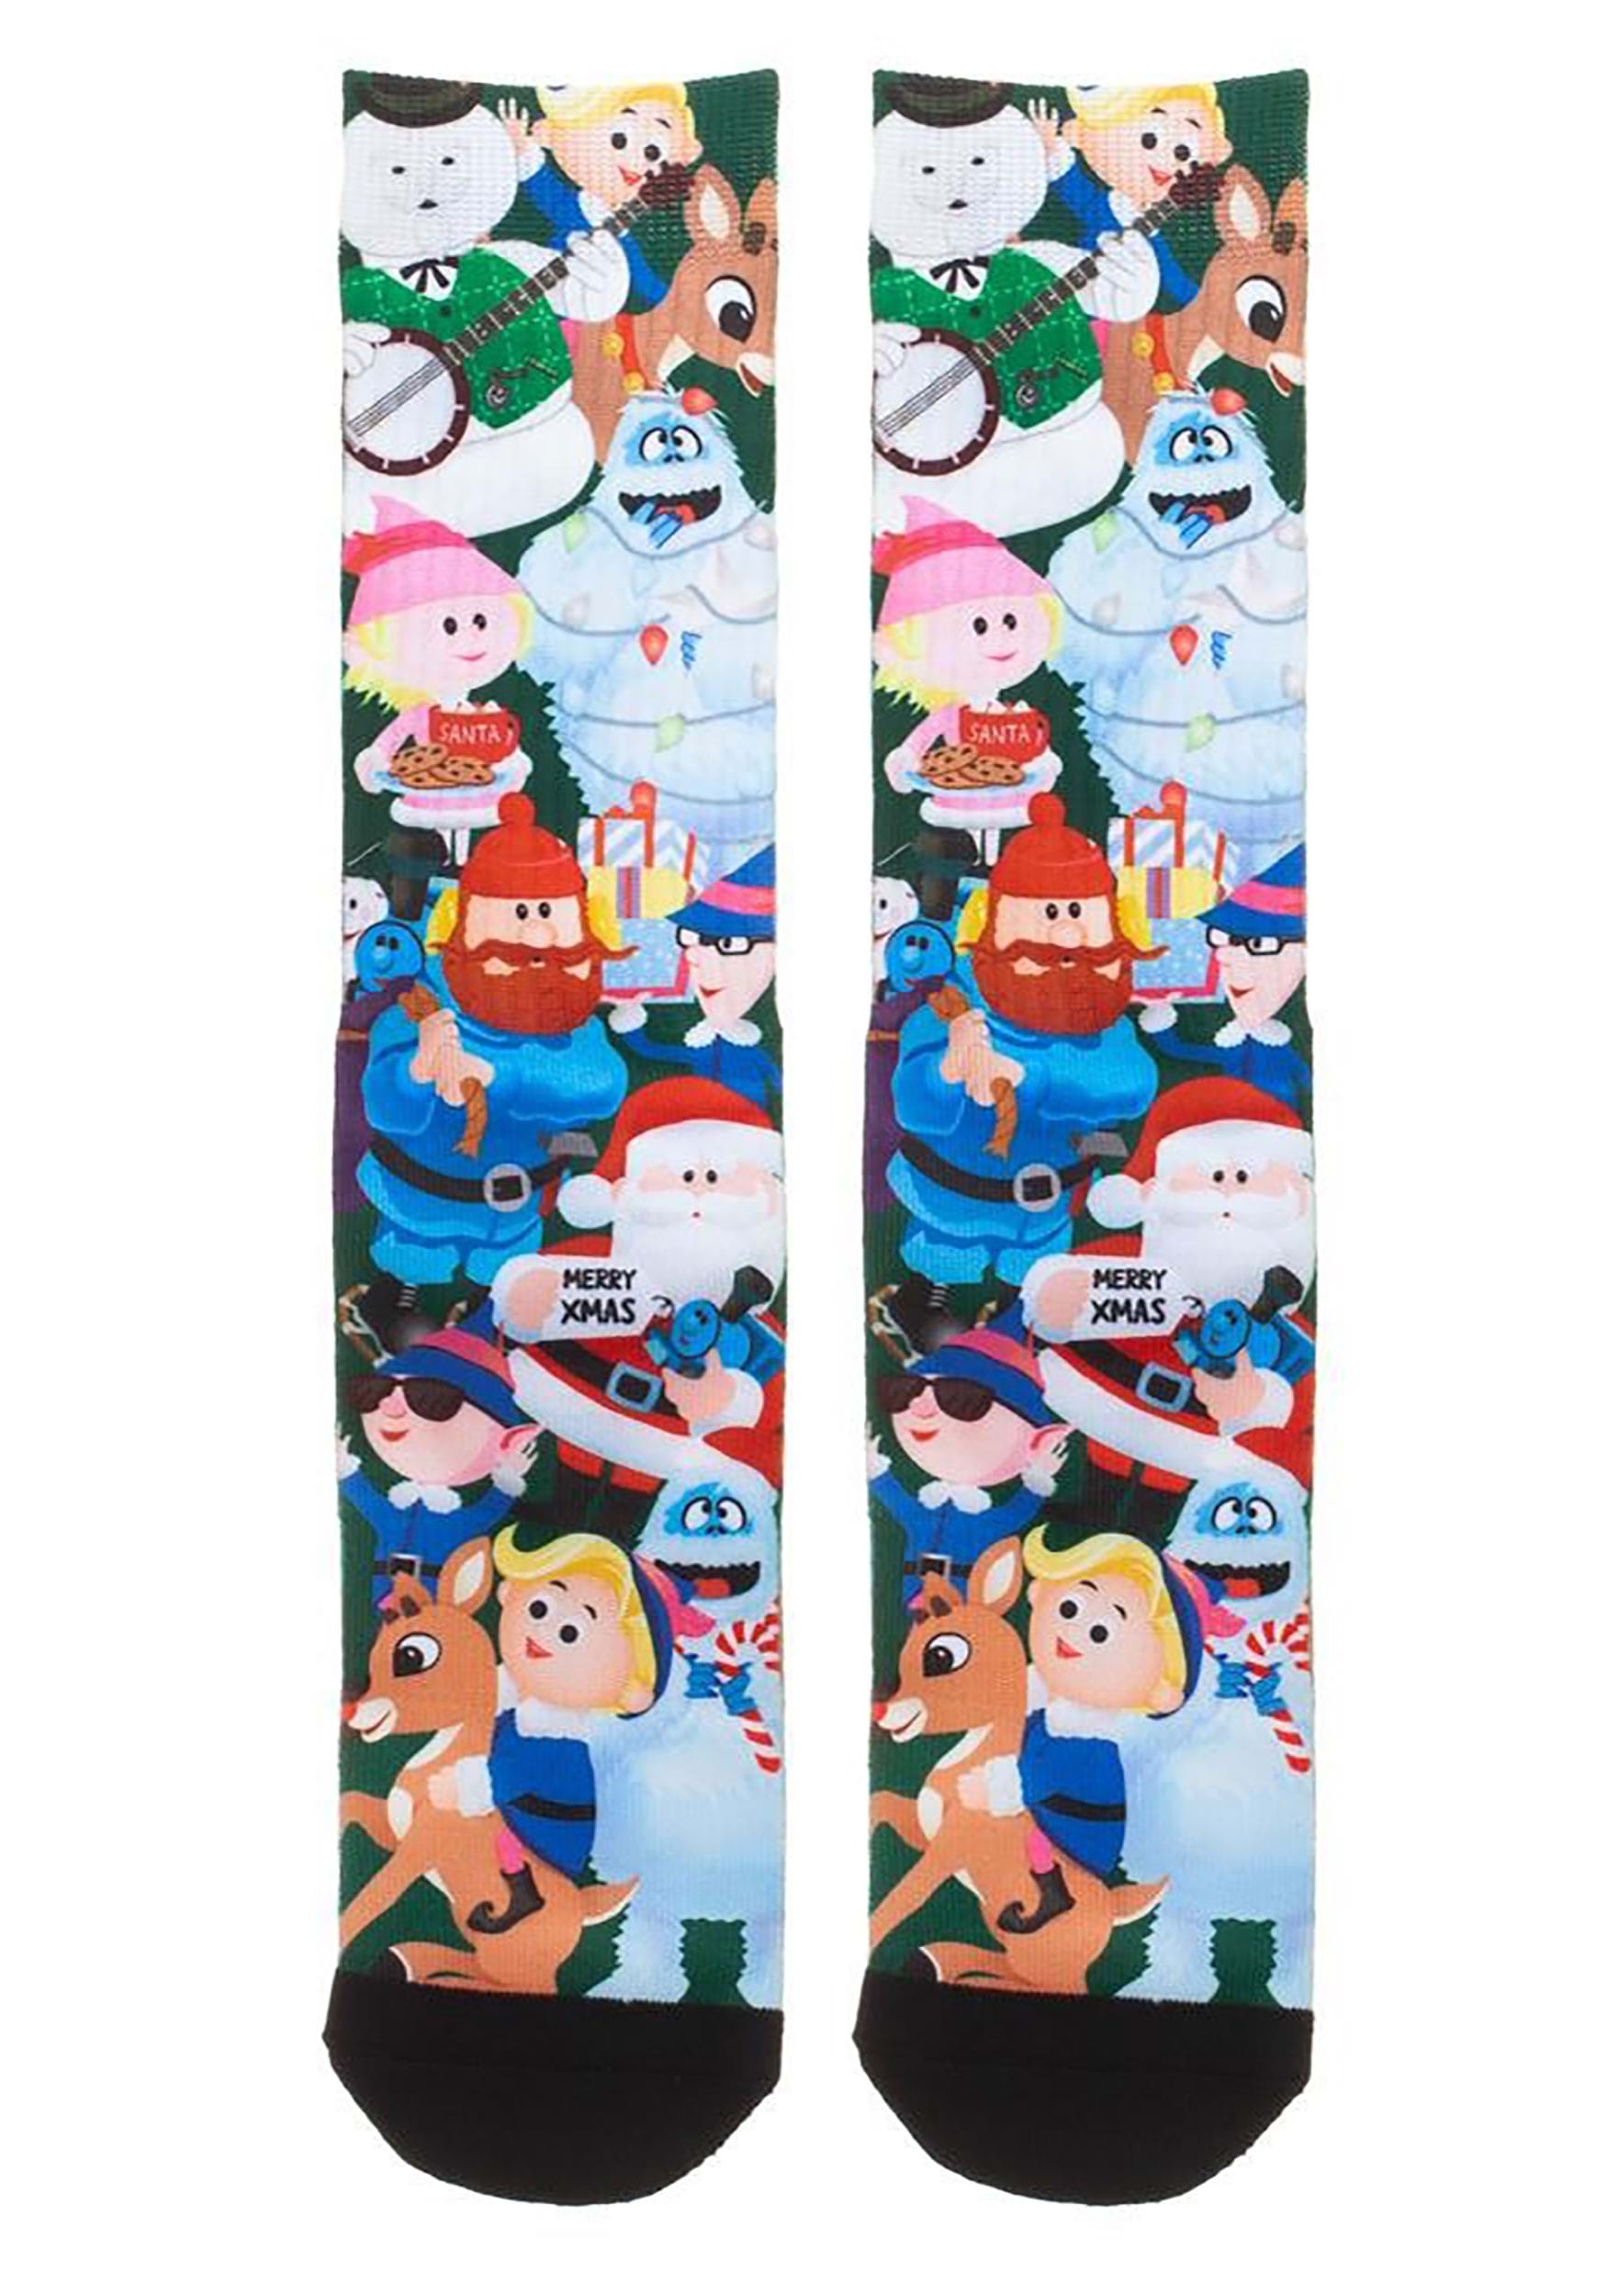 Sublimated Rudolph the Red-Nosed Reindeer Socks